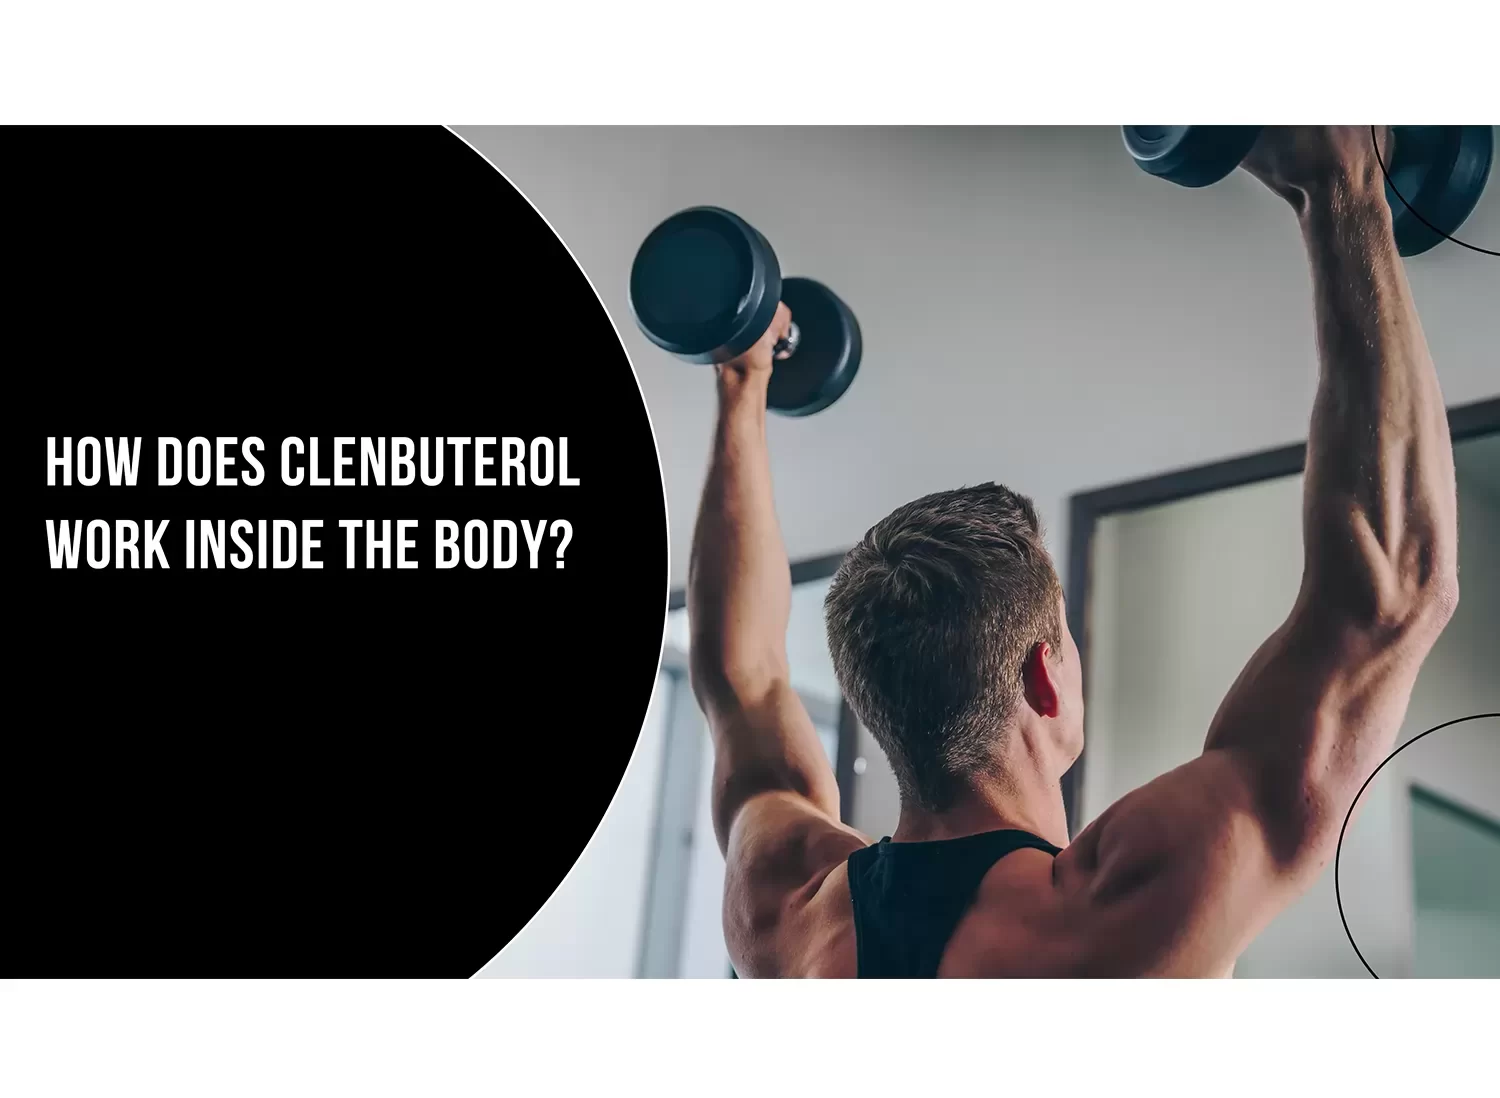 How does Clenbuterol work